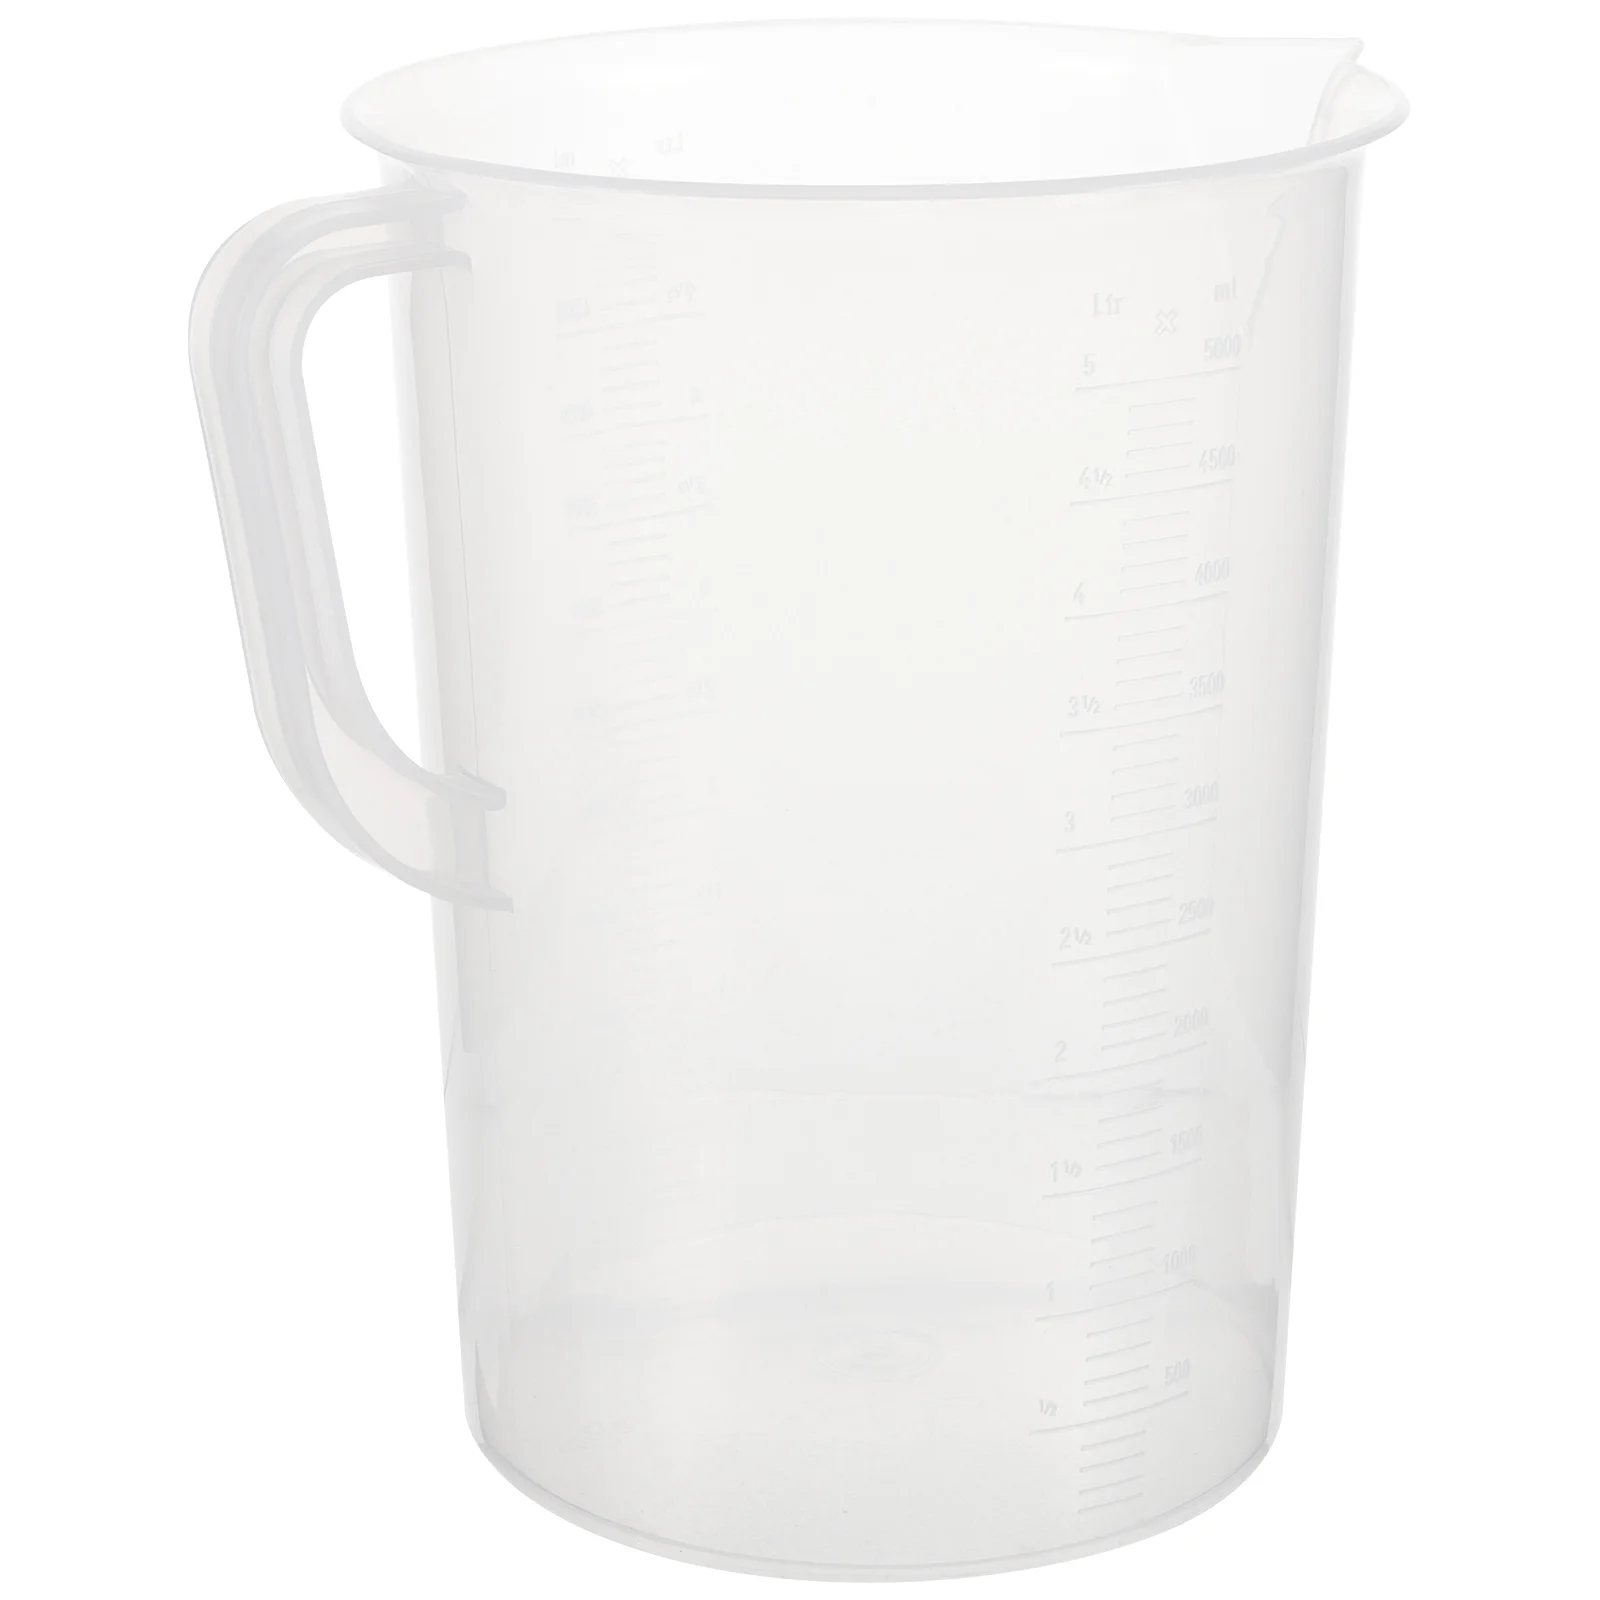 

Measuring Cup New Apartment Essentials Plastic Cups Clear Oil Large Capacity Liquid Dispenser Scaled Holder